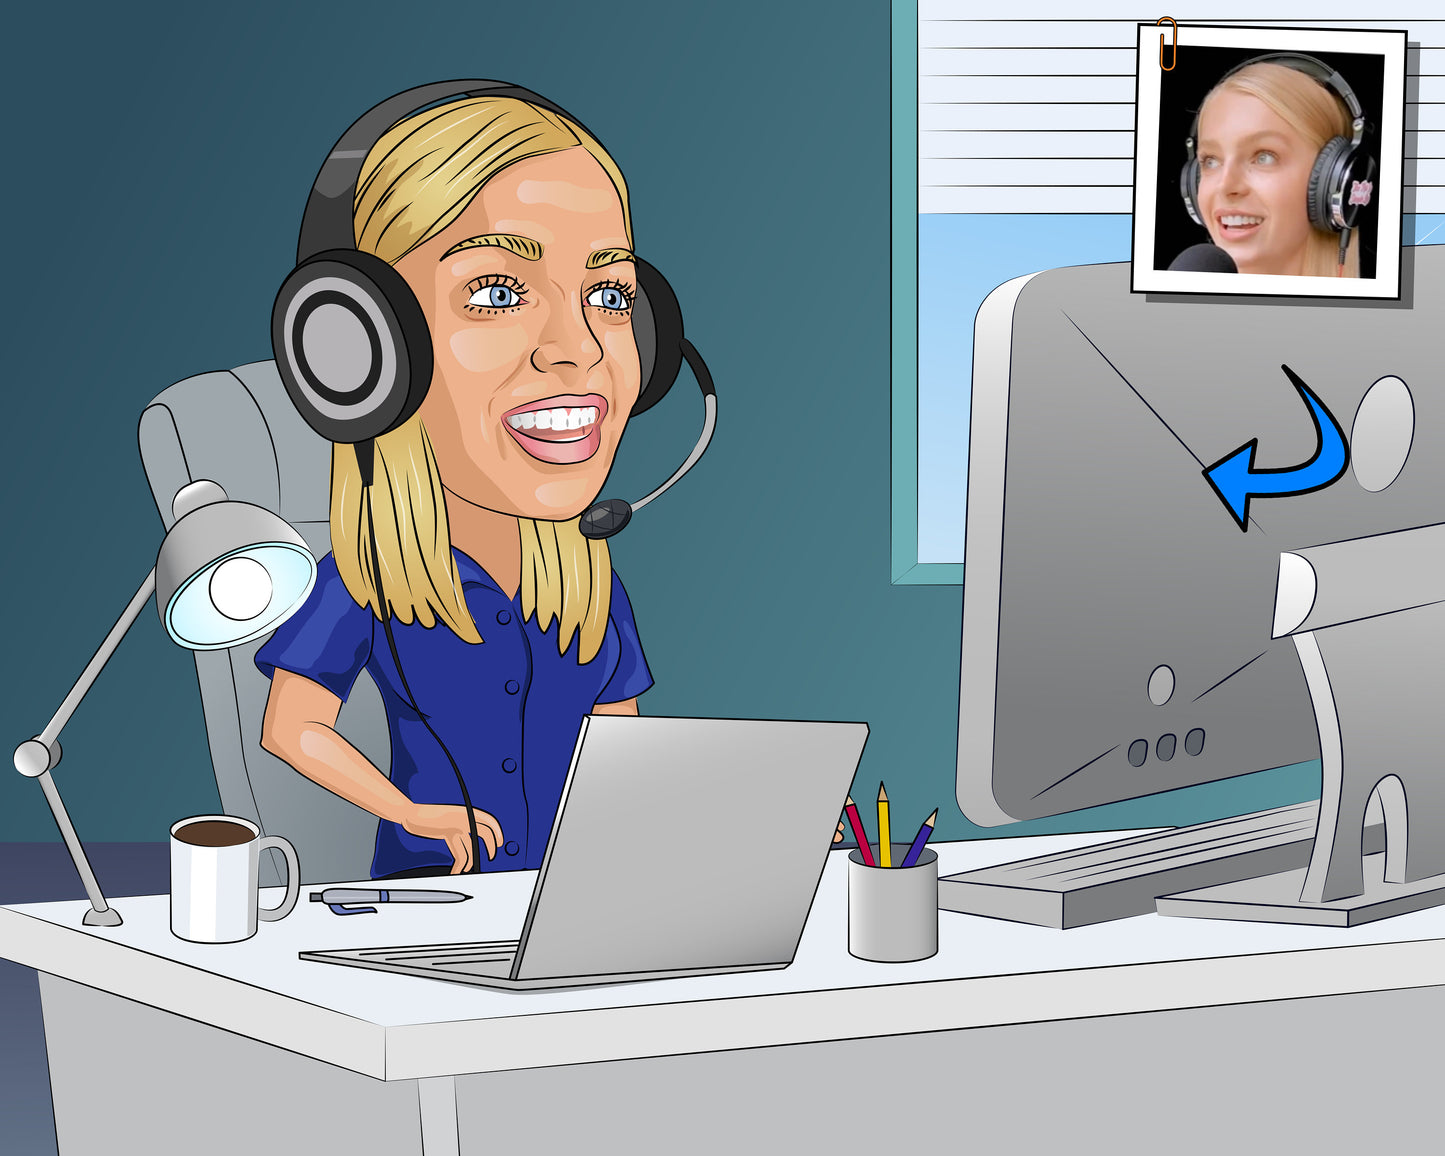 Call Center Operator Gift - Custom Caricature Portrait From Photo, dispatcher gift